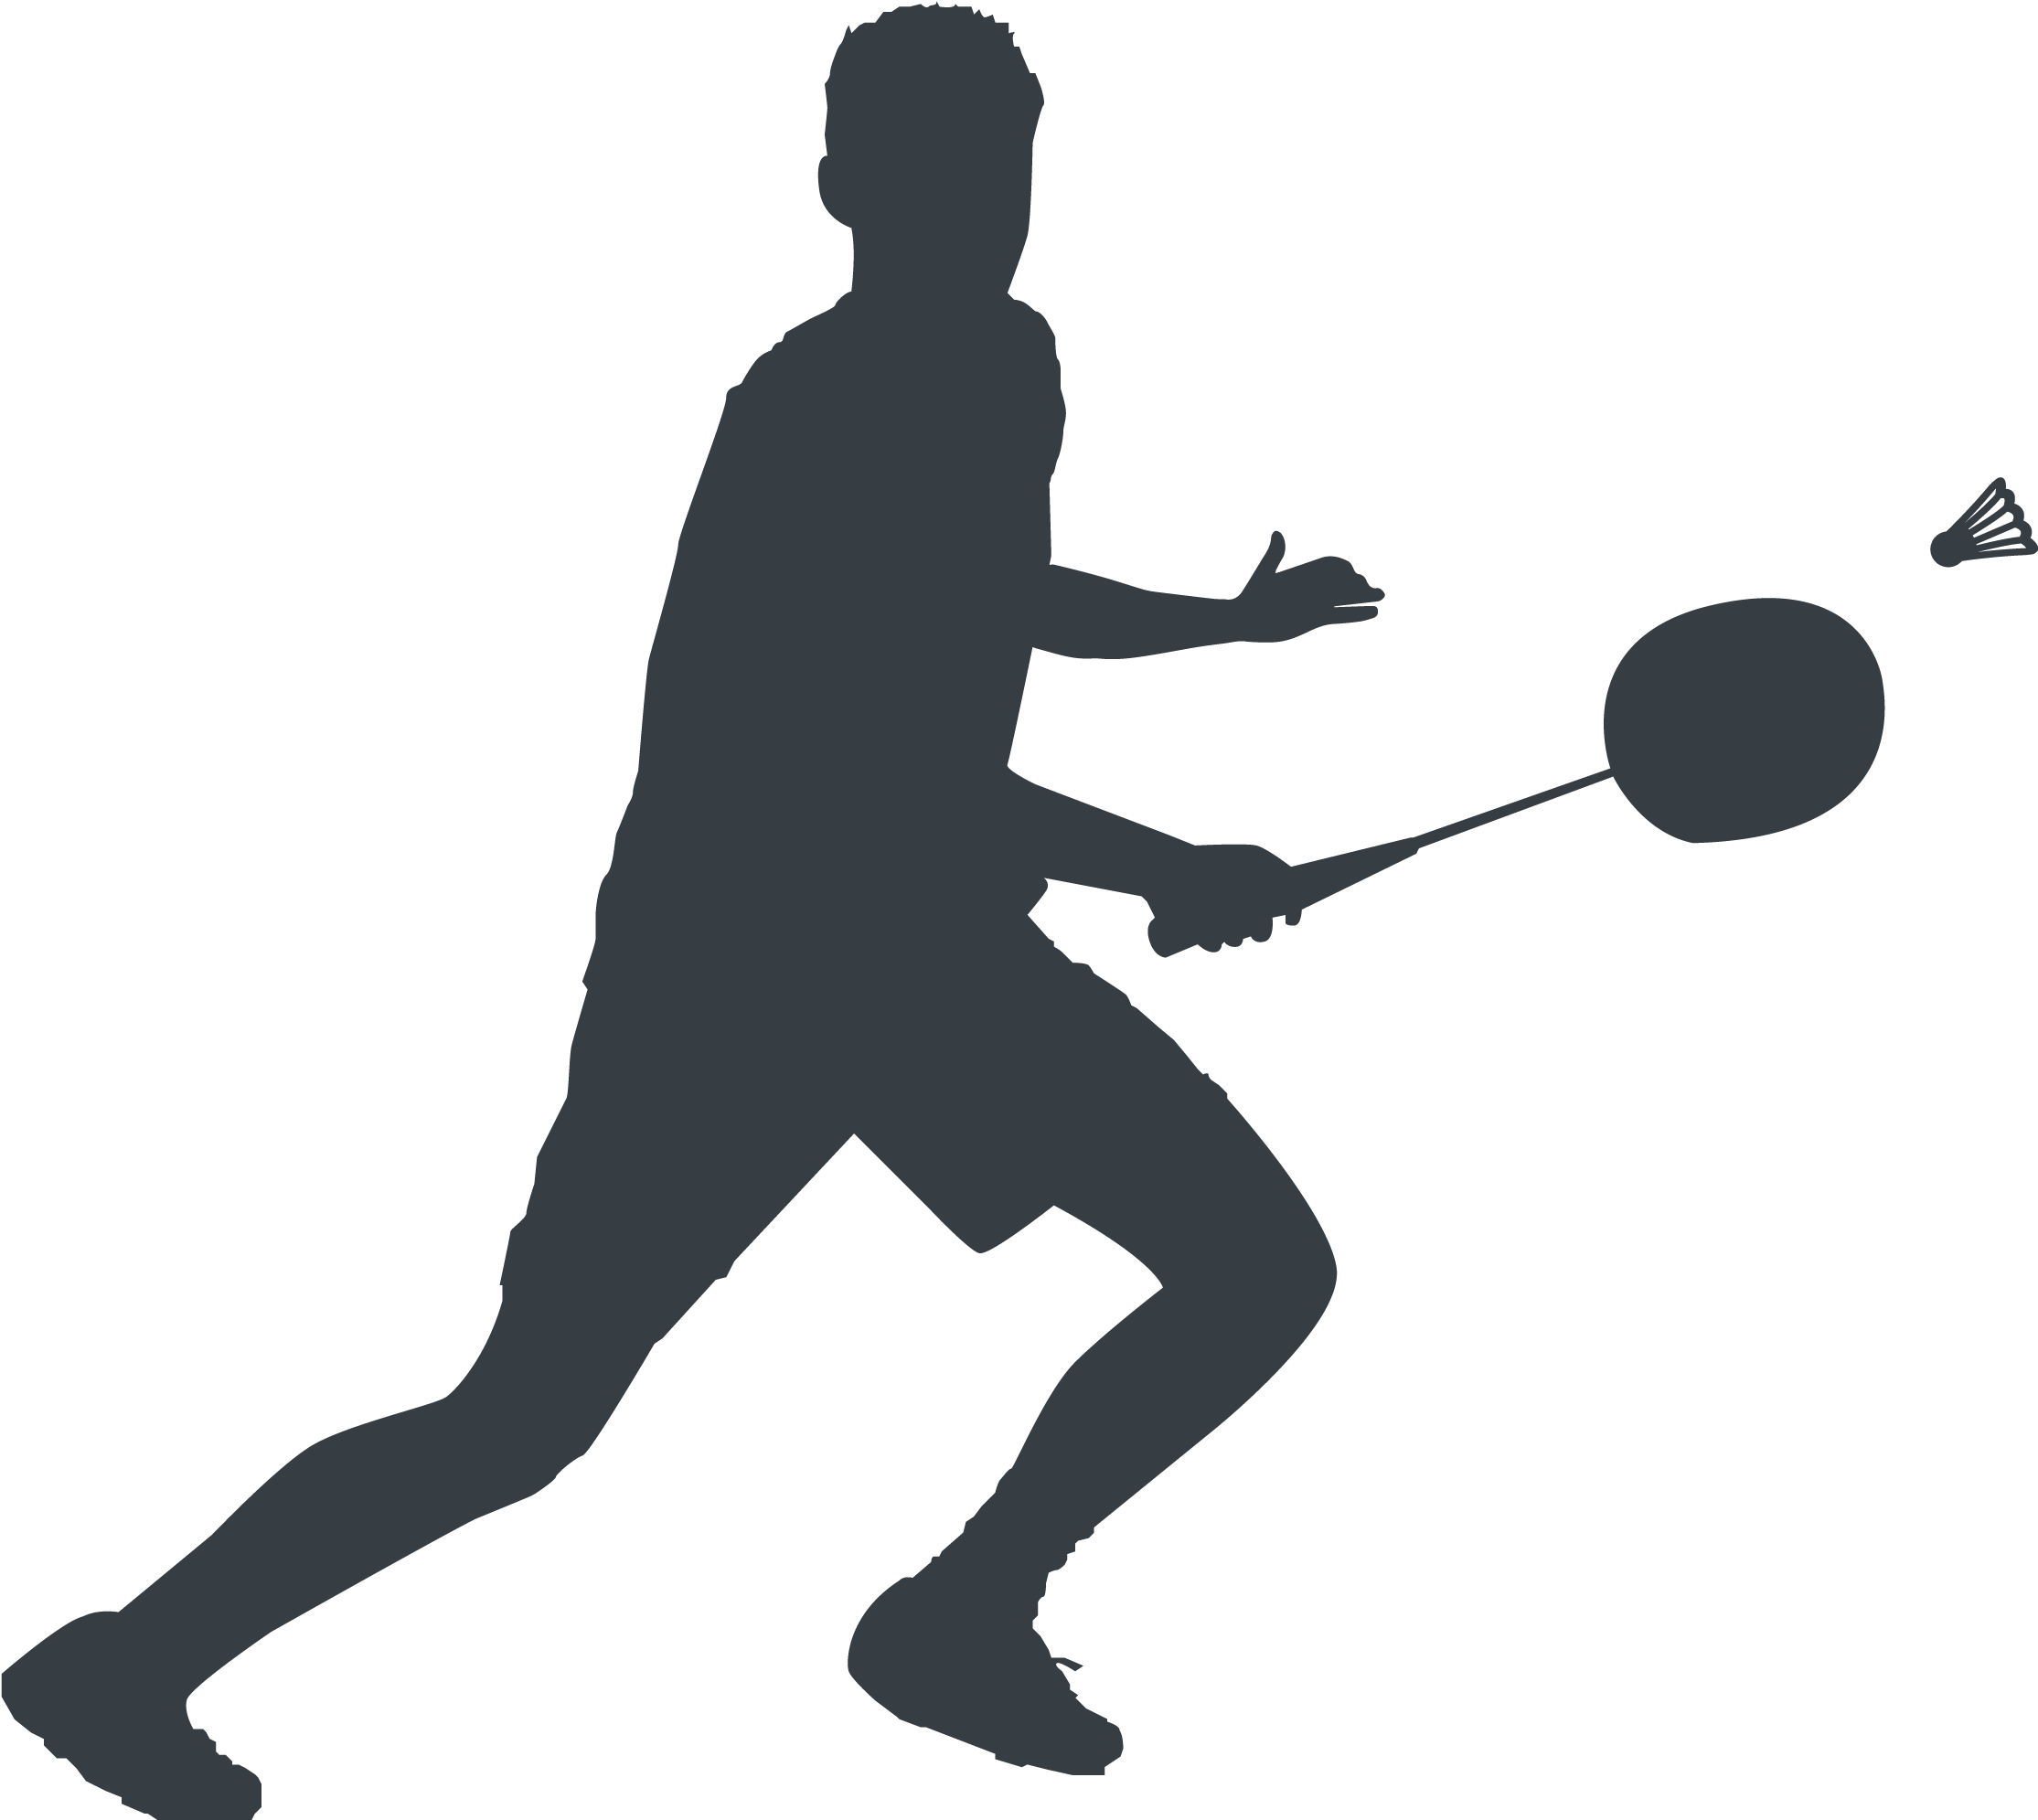 A Silhouette Of A Man Holding A Racket